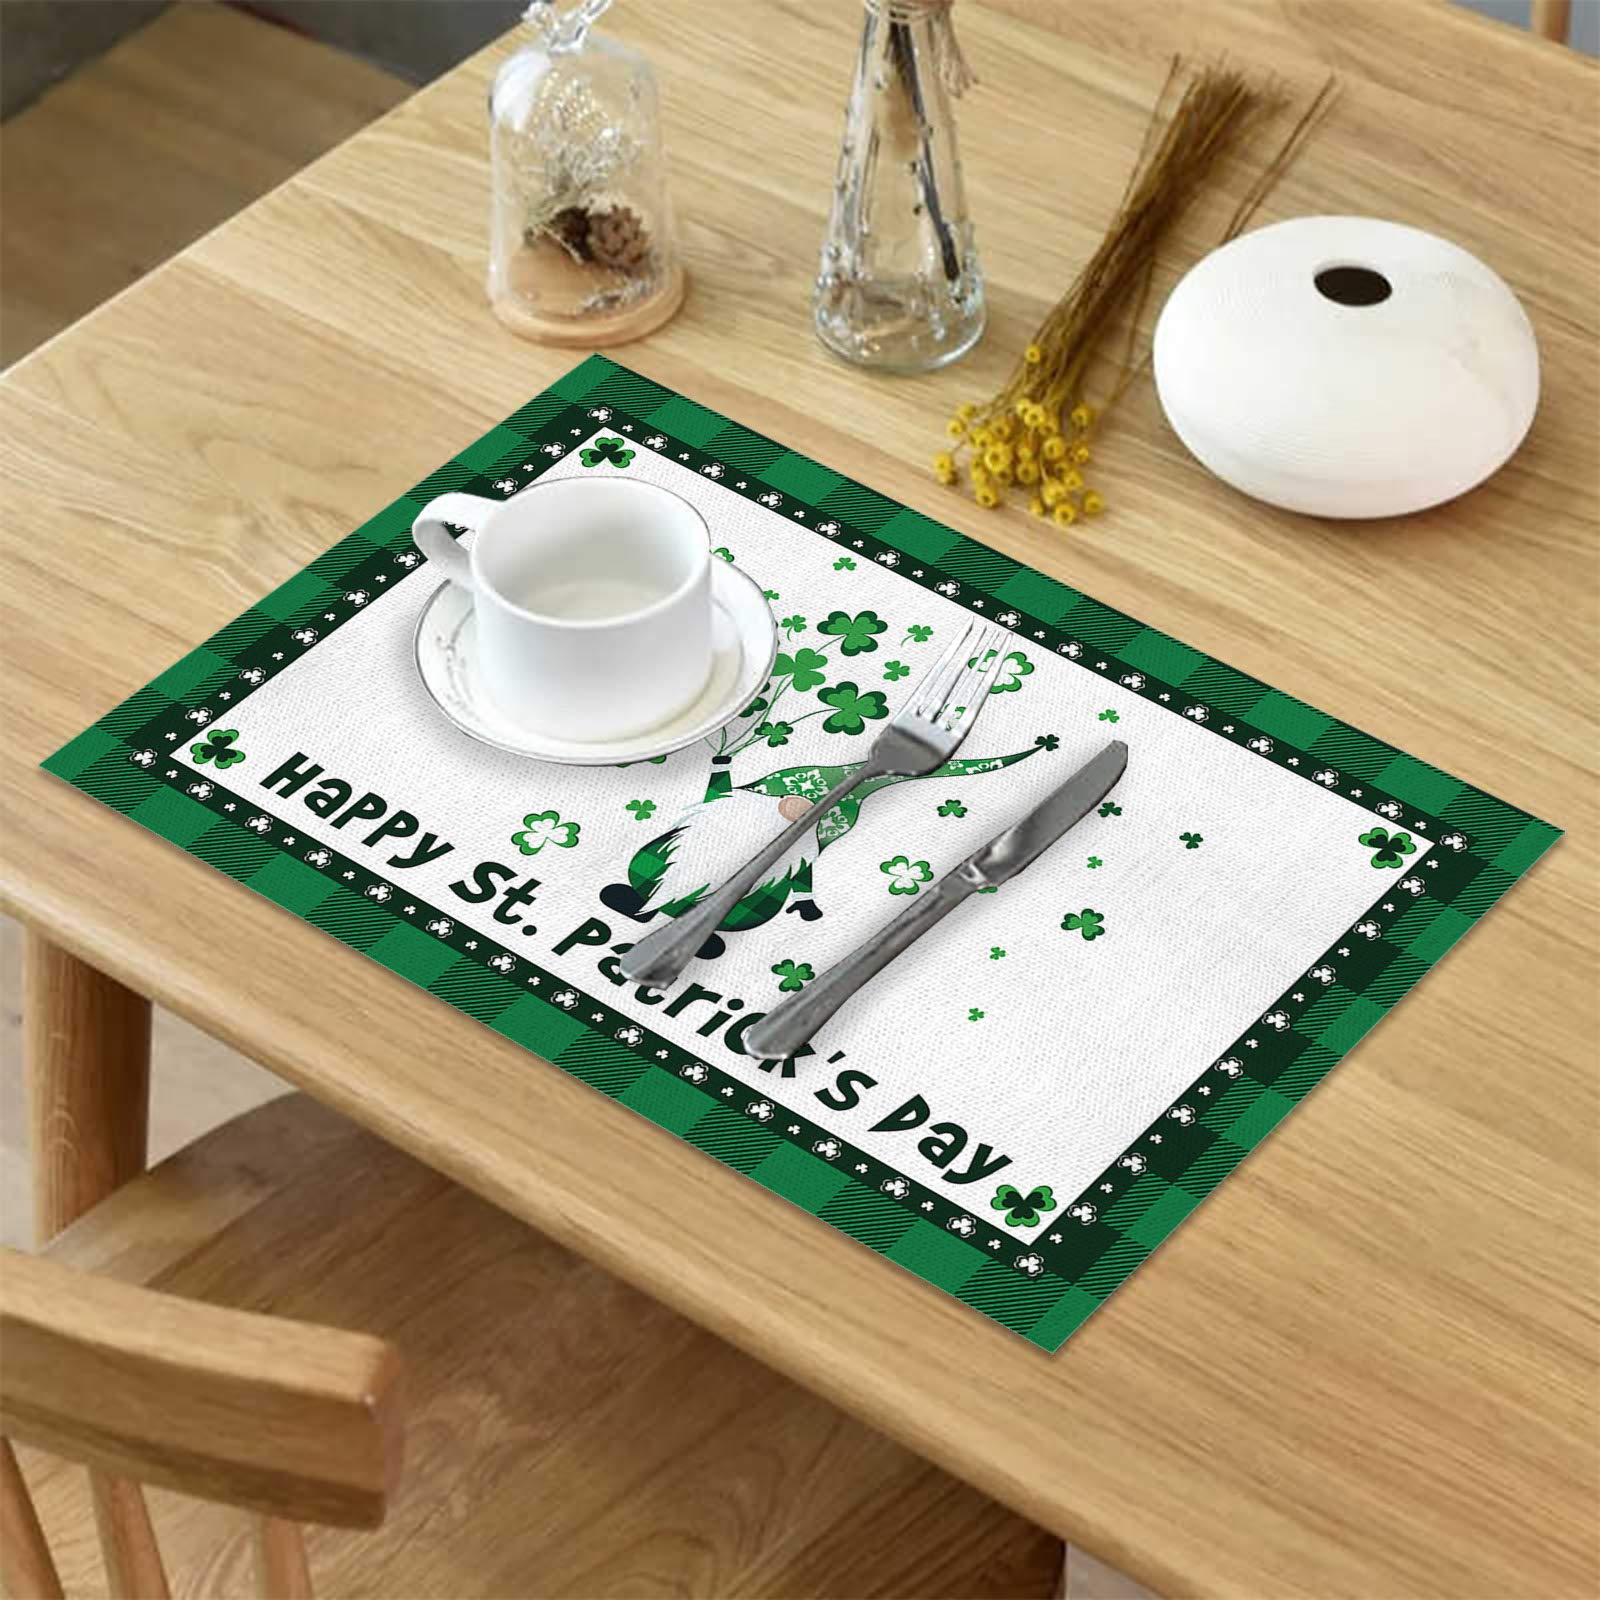 Happy St. Patrick's Day - Adorable Gnome Placemat